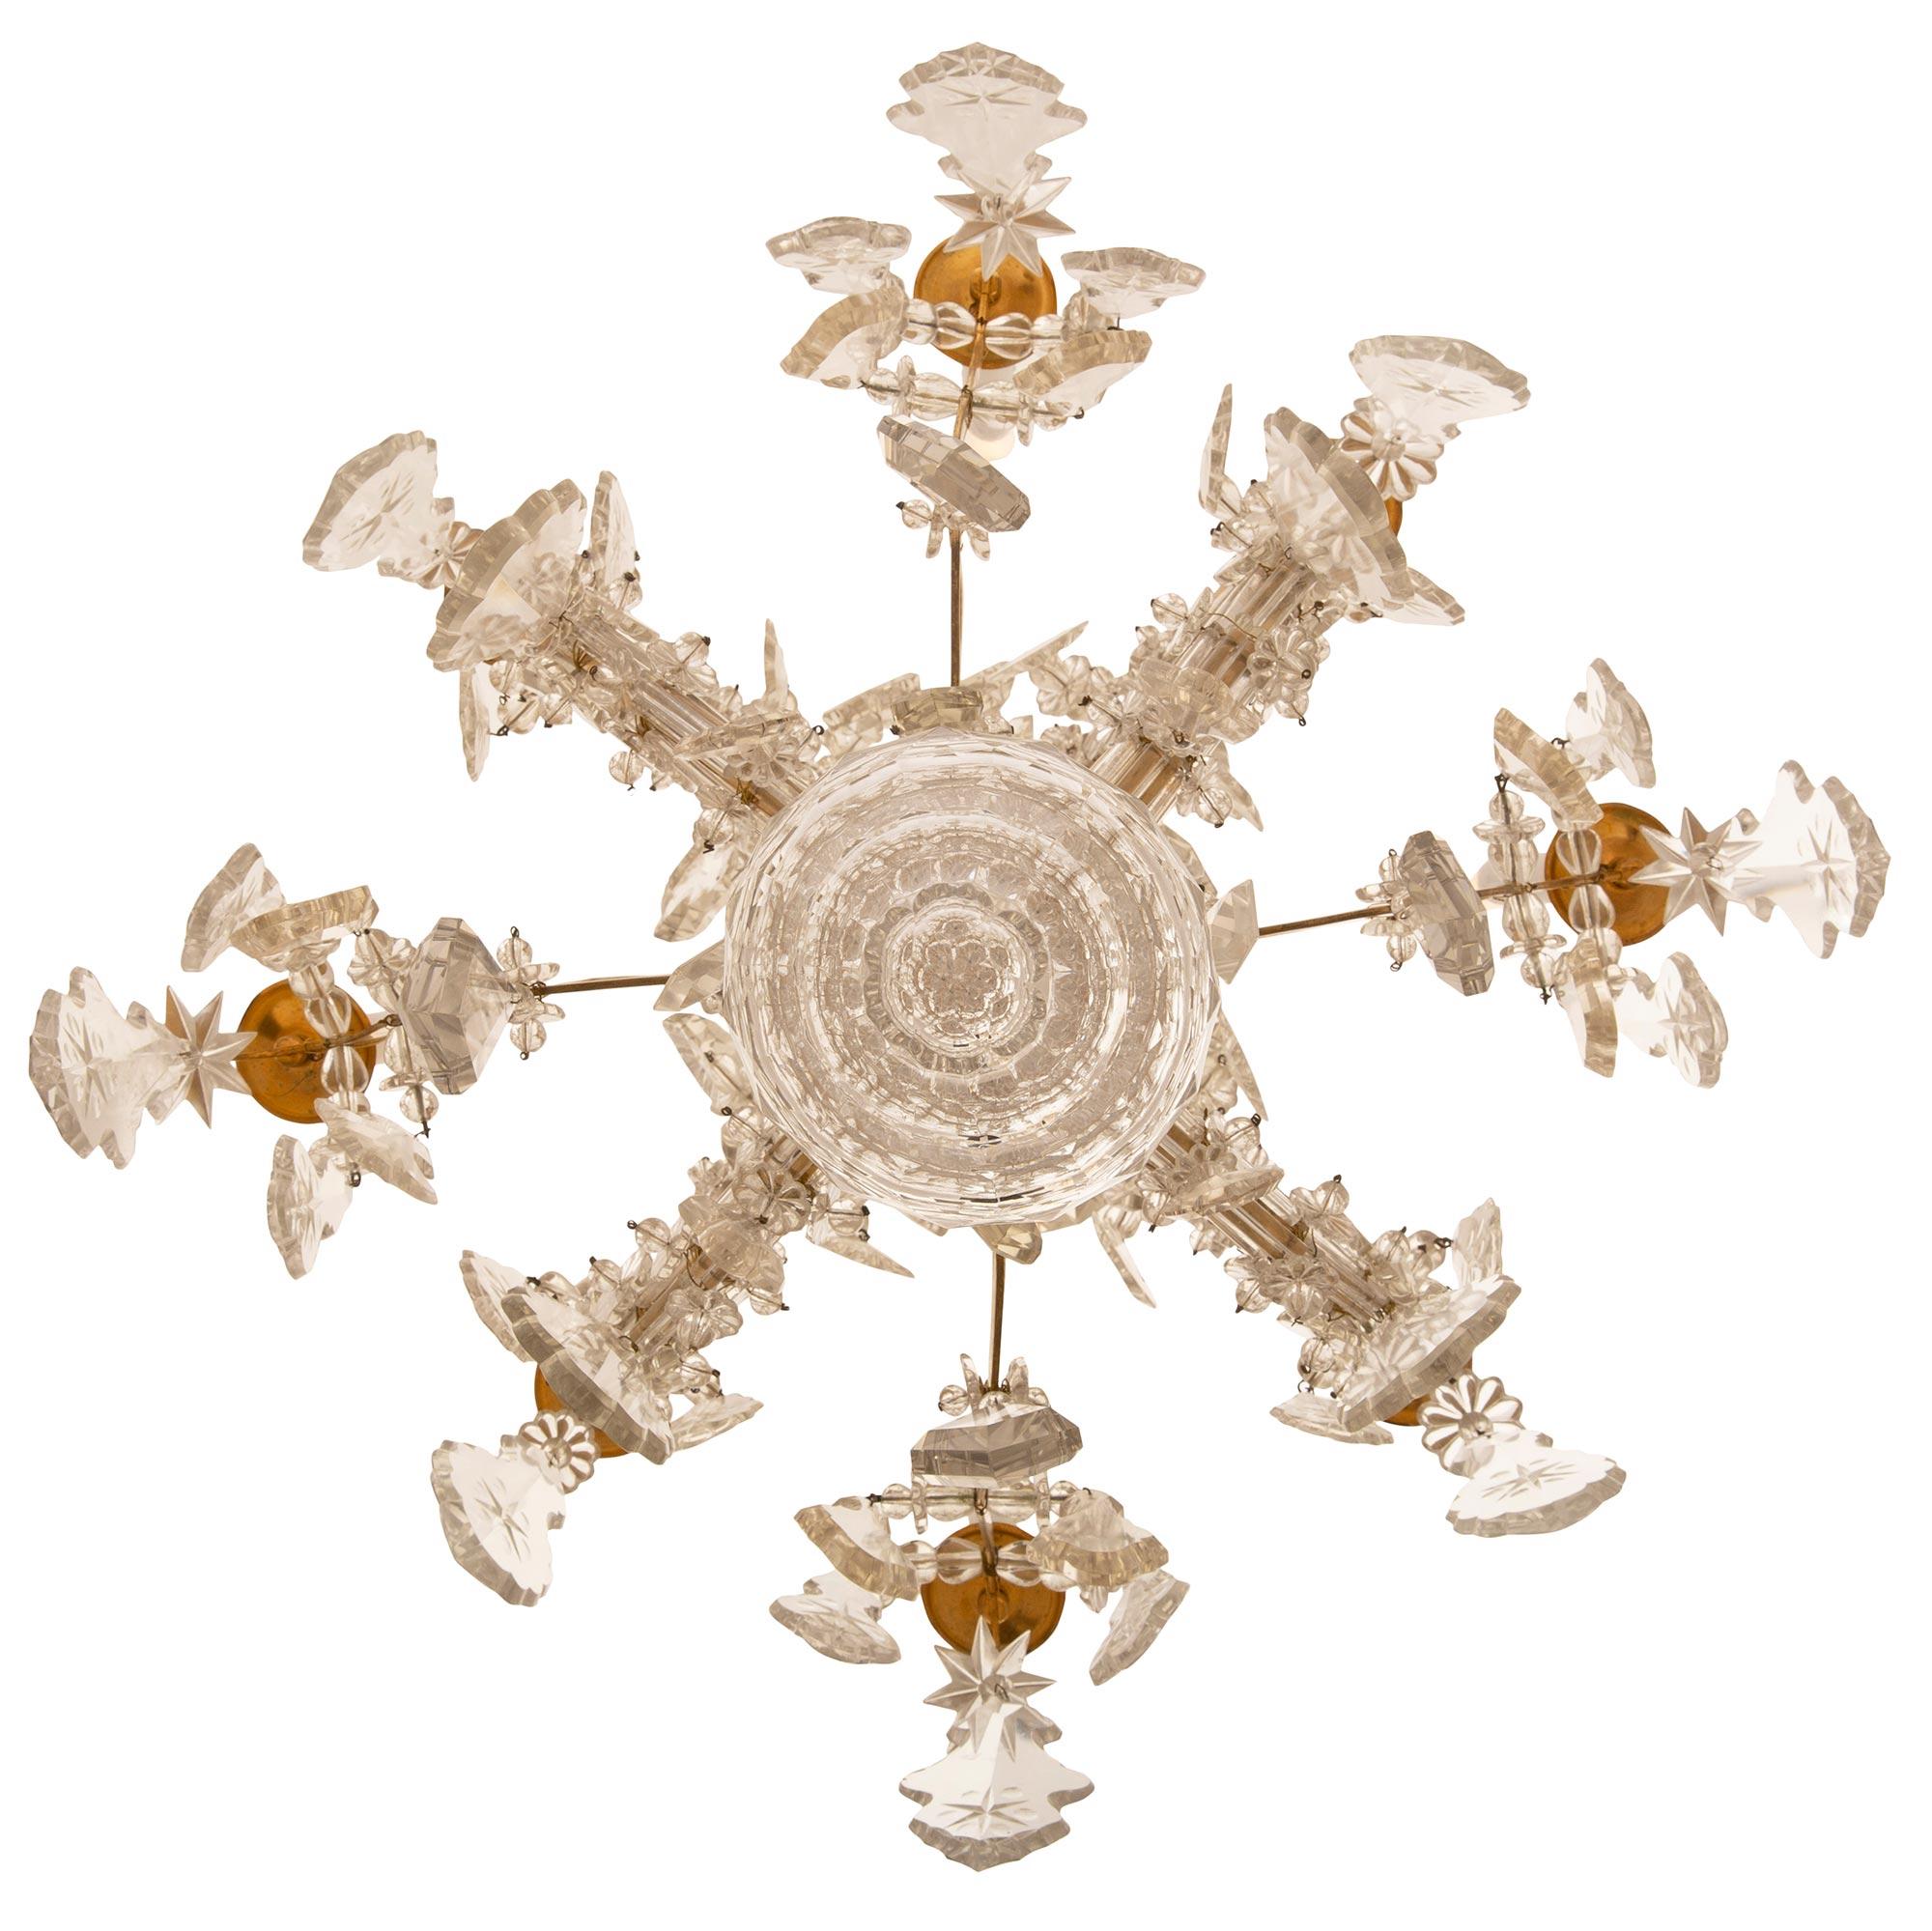 French Mid-19th Century Louis XV Style Ormolu and Baccarat Crystal Chandelier For Sale 4